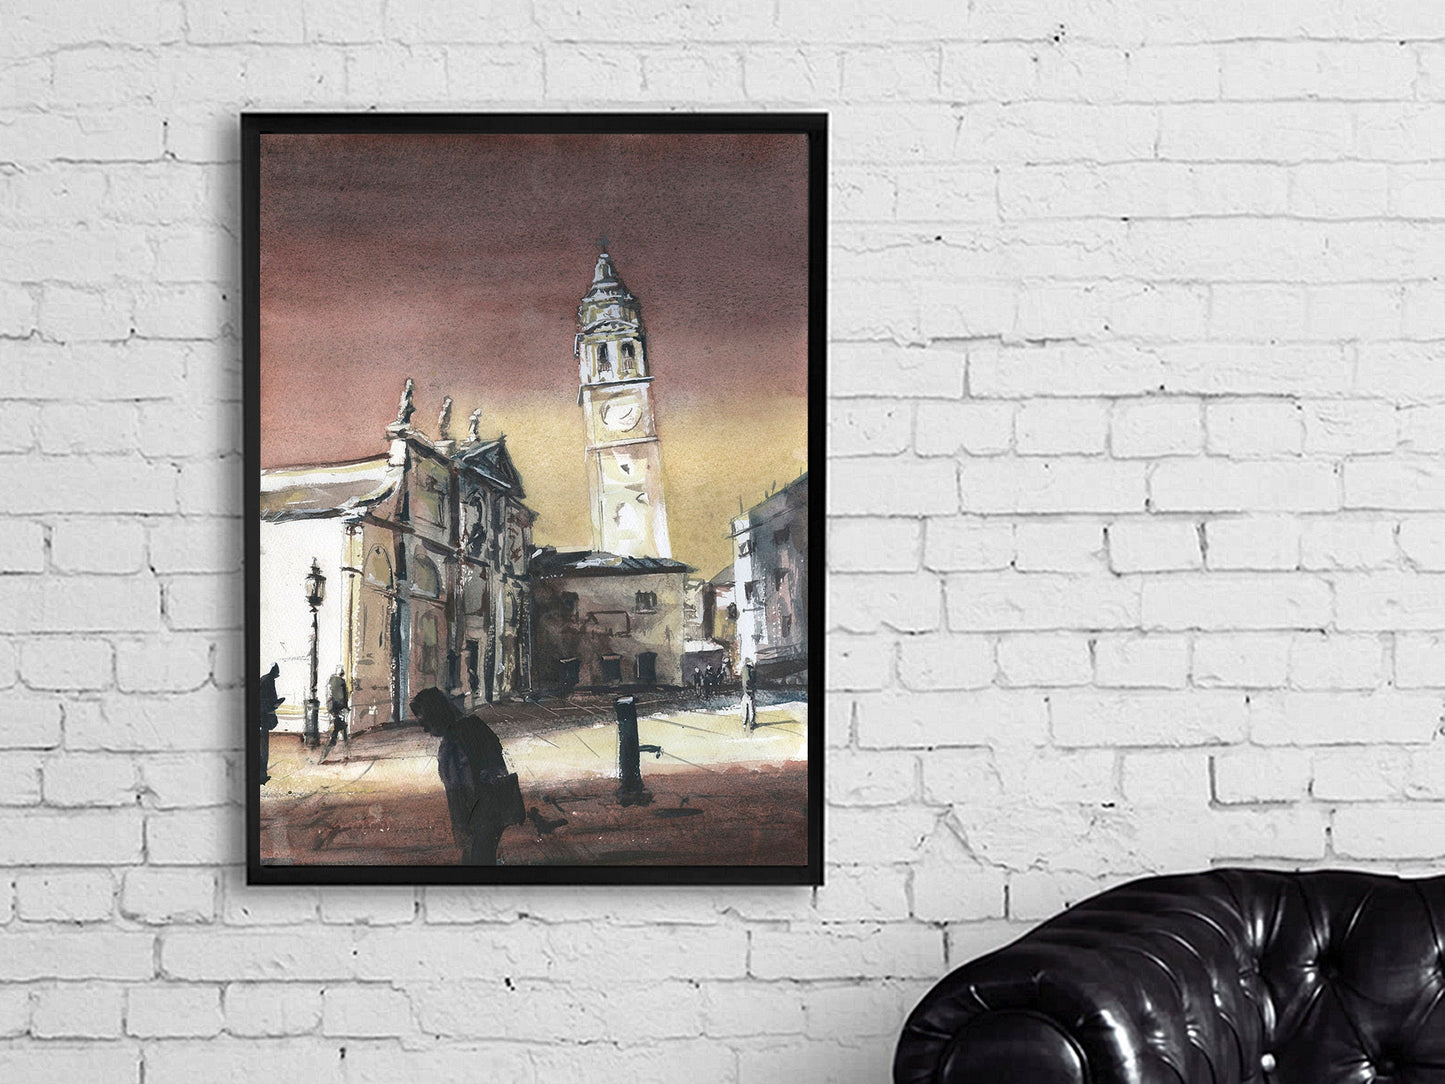 Venice, Italy leaning tower- watercolor painting. The leaning tower of Venice, Italy artwork church belltower watercolor art Venice painting